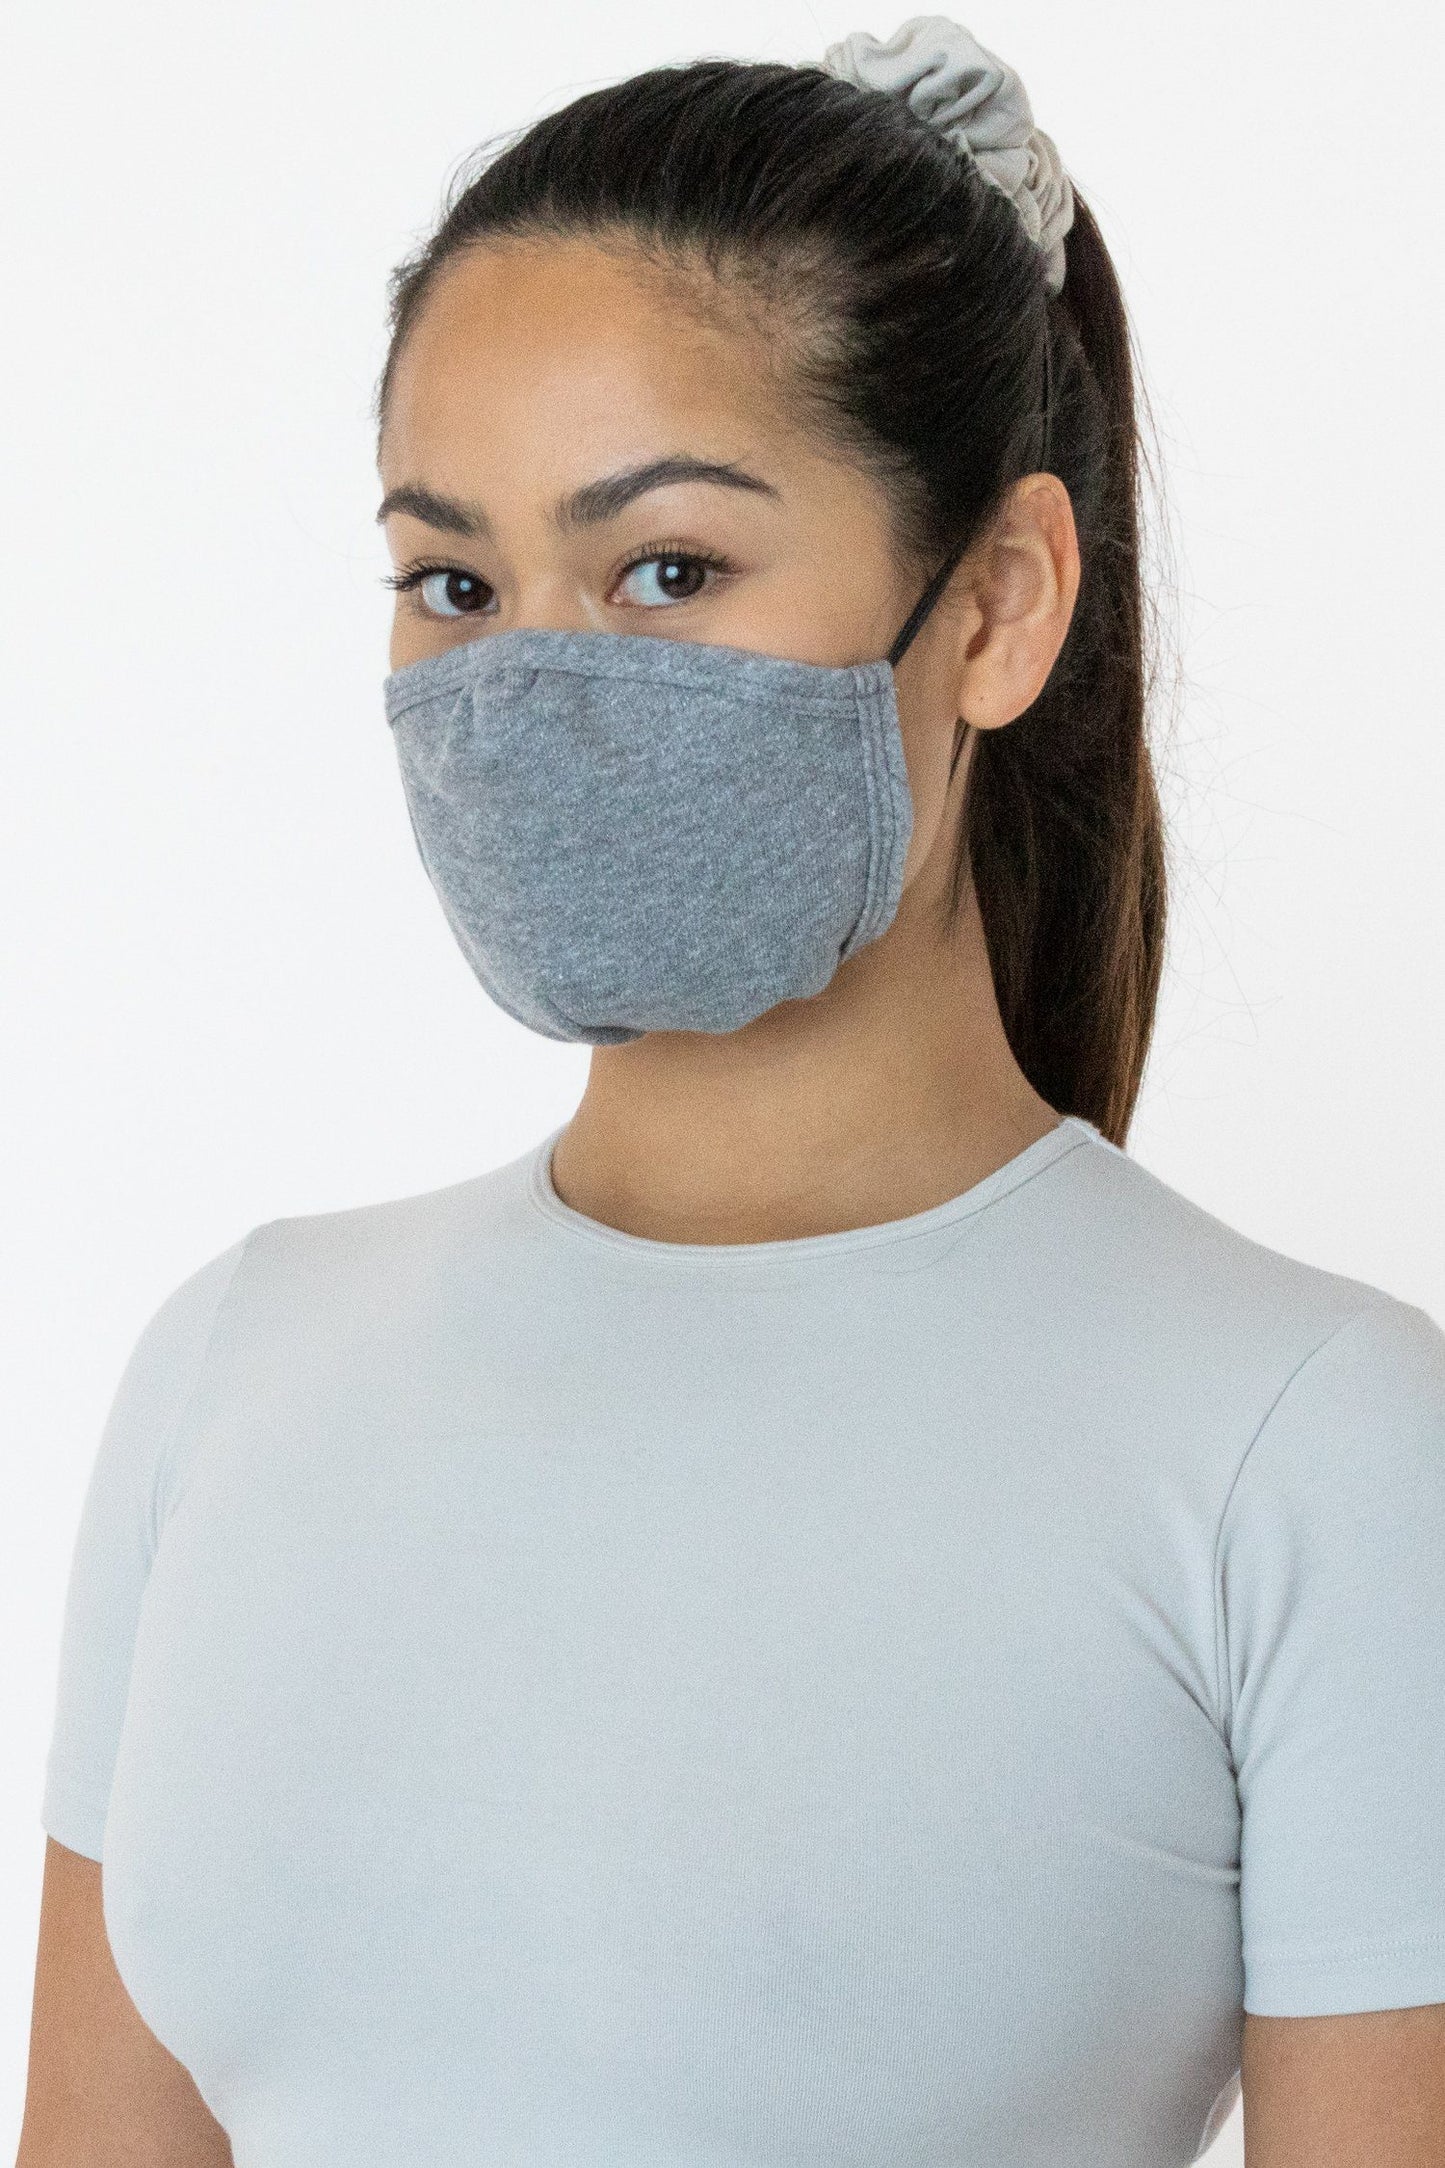 Los Angeles Apparel - 3 Pack of Cotton Face Masks, Heather Grey